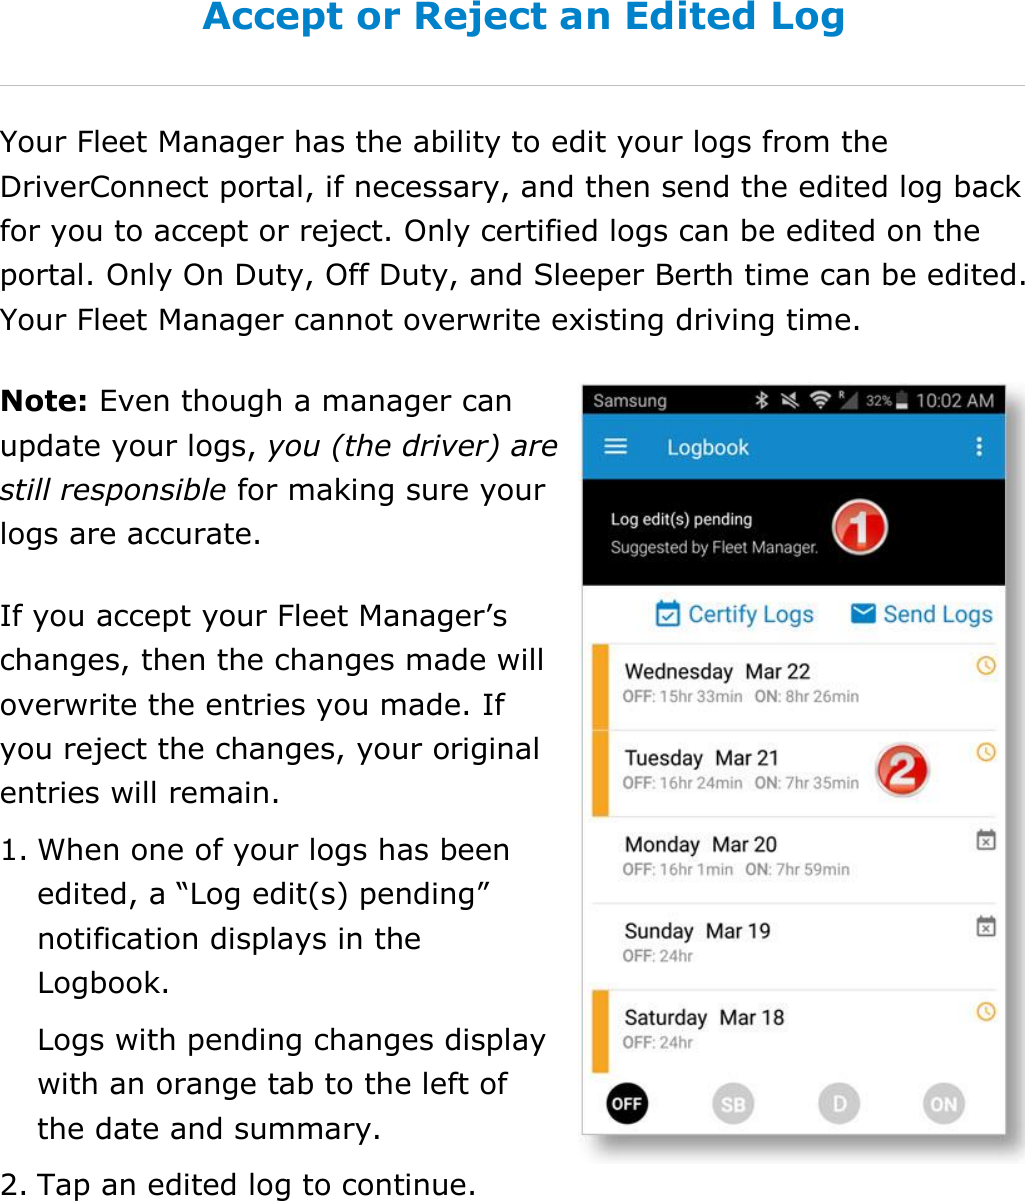 Manage My Logbook DriverConnect User Guide  44 © 2017, Rand McNally, Inc. Accept or Reject an Edited Log Your Fleet Manager has the ability to edit your logs from the DriverConnect portal, if necessary, and then send the edited log back for you to accept or reject. Only certified logs can be edited on the portal. Only On Duty, Off Duty, and Sleeper Berth time can be edited. Your Fleet Manager cannot overwrite existing driving time. Note: Even though a manager can update your logs, you (the driver) are still responsible for making sure your logs are accurate. If you accept your Fleet Manager’s changes, then the changes made will overwrite the entries you made. If you reject the changes, your original entries will remain. 1. When one of your logs has been edited, a “Log edit(s) pending” notification displays in the Logbook. Logs with pending changes display with an orange tab to the left of the date and summary. 2. Tap an edited log to continue.     